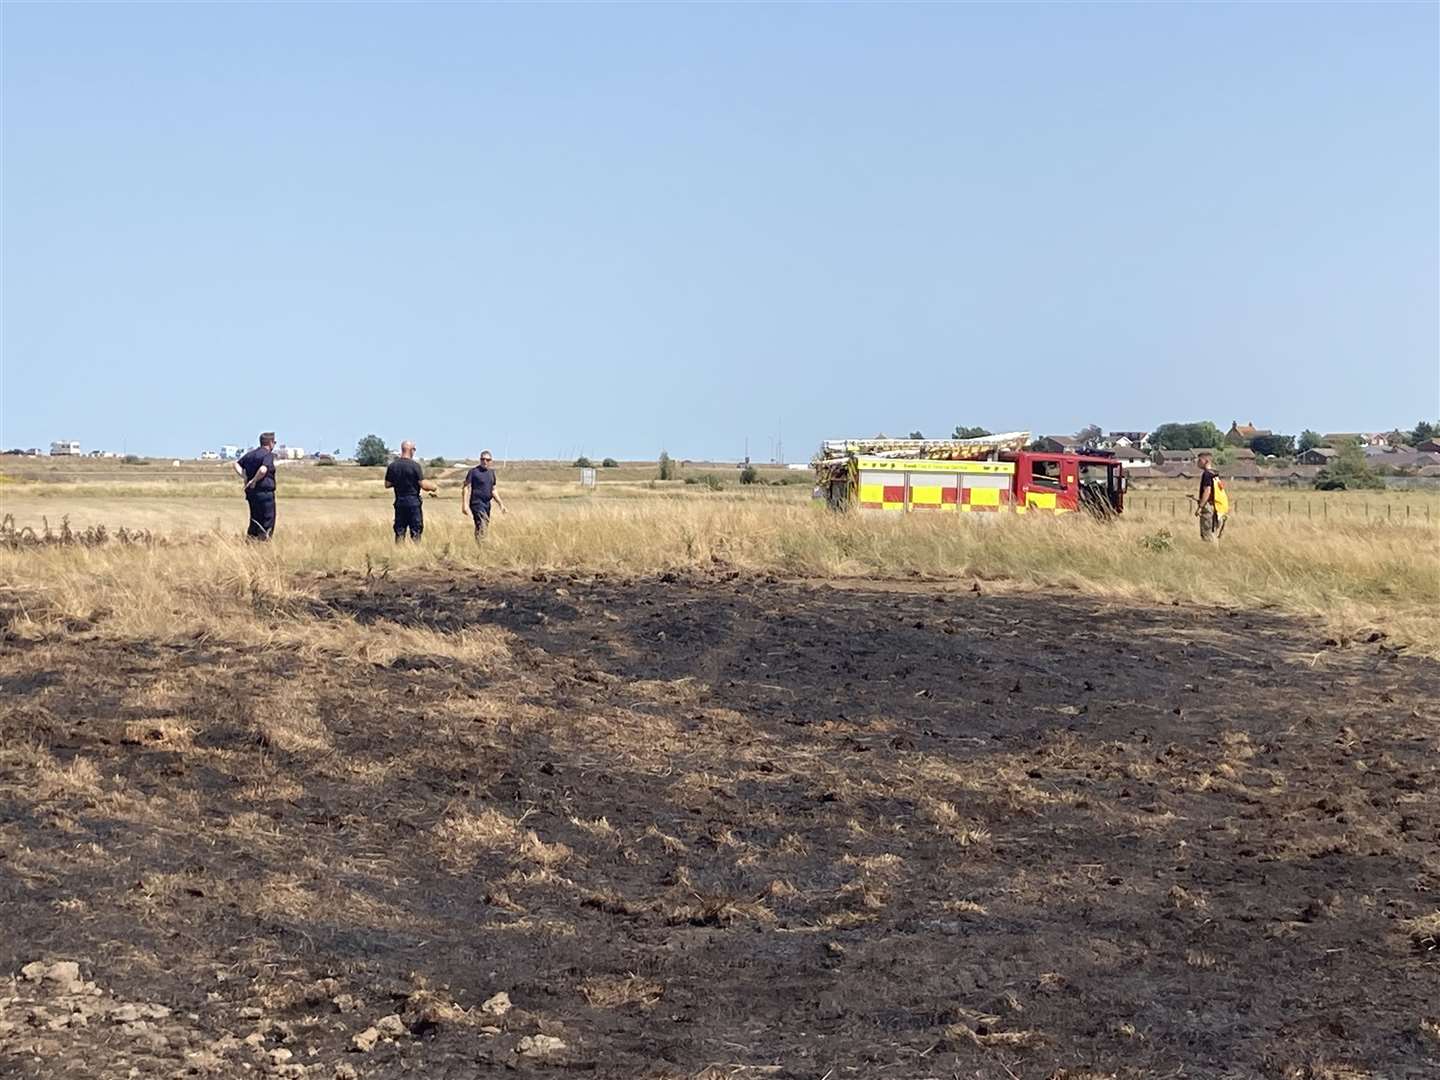 Firefighters return to damp down smoking areas of charred ground at Barton's Point, Sheerness. Picture: John Nurden